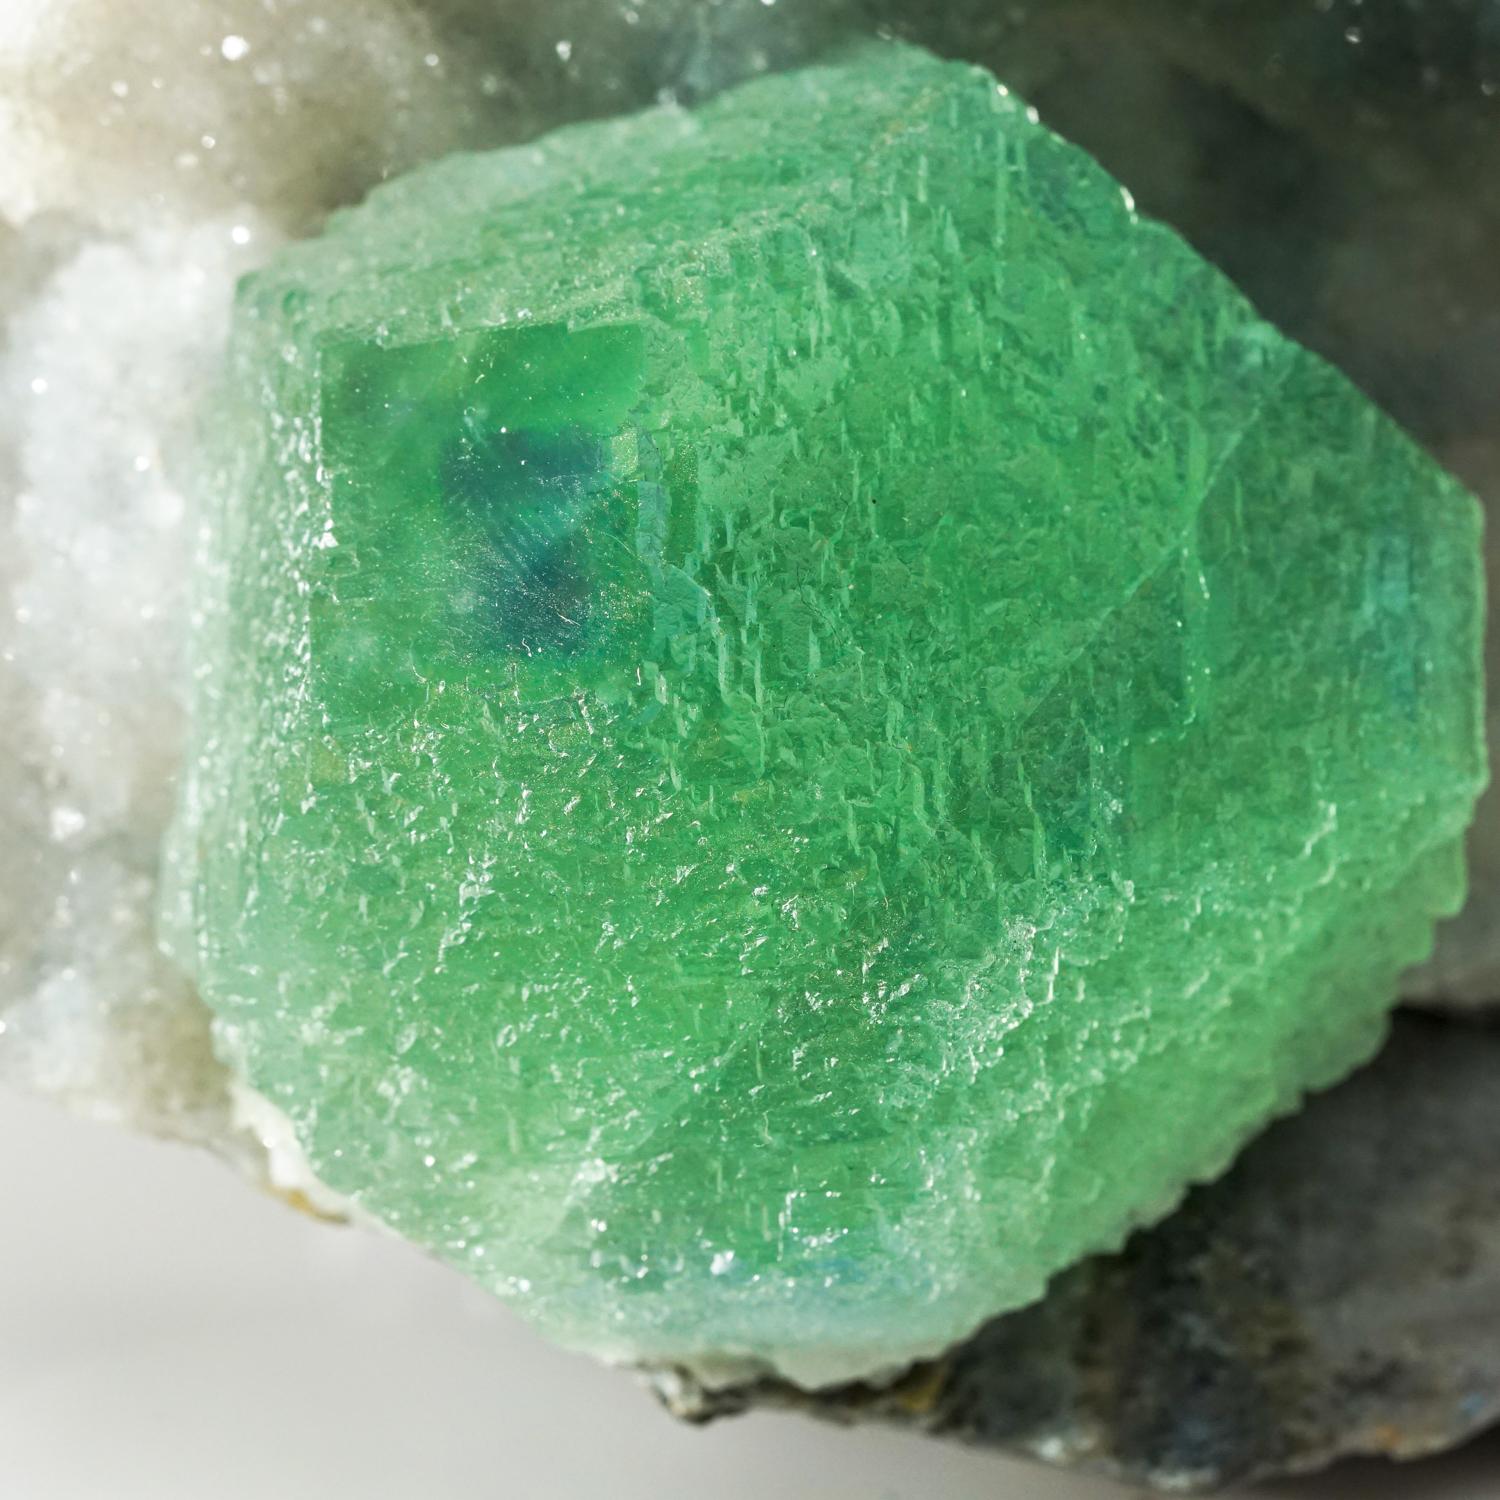 Contemporary Green Fluorite on Quartz Matrix from from Ruyuan, Lechang, Guandong, China (2.5  For Sale